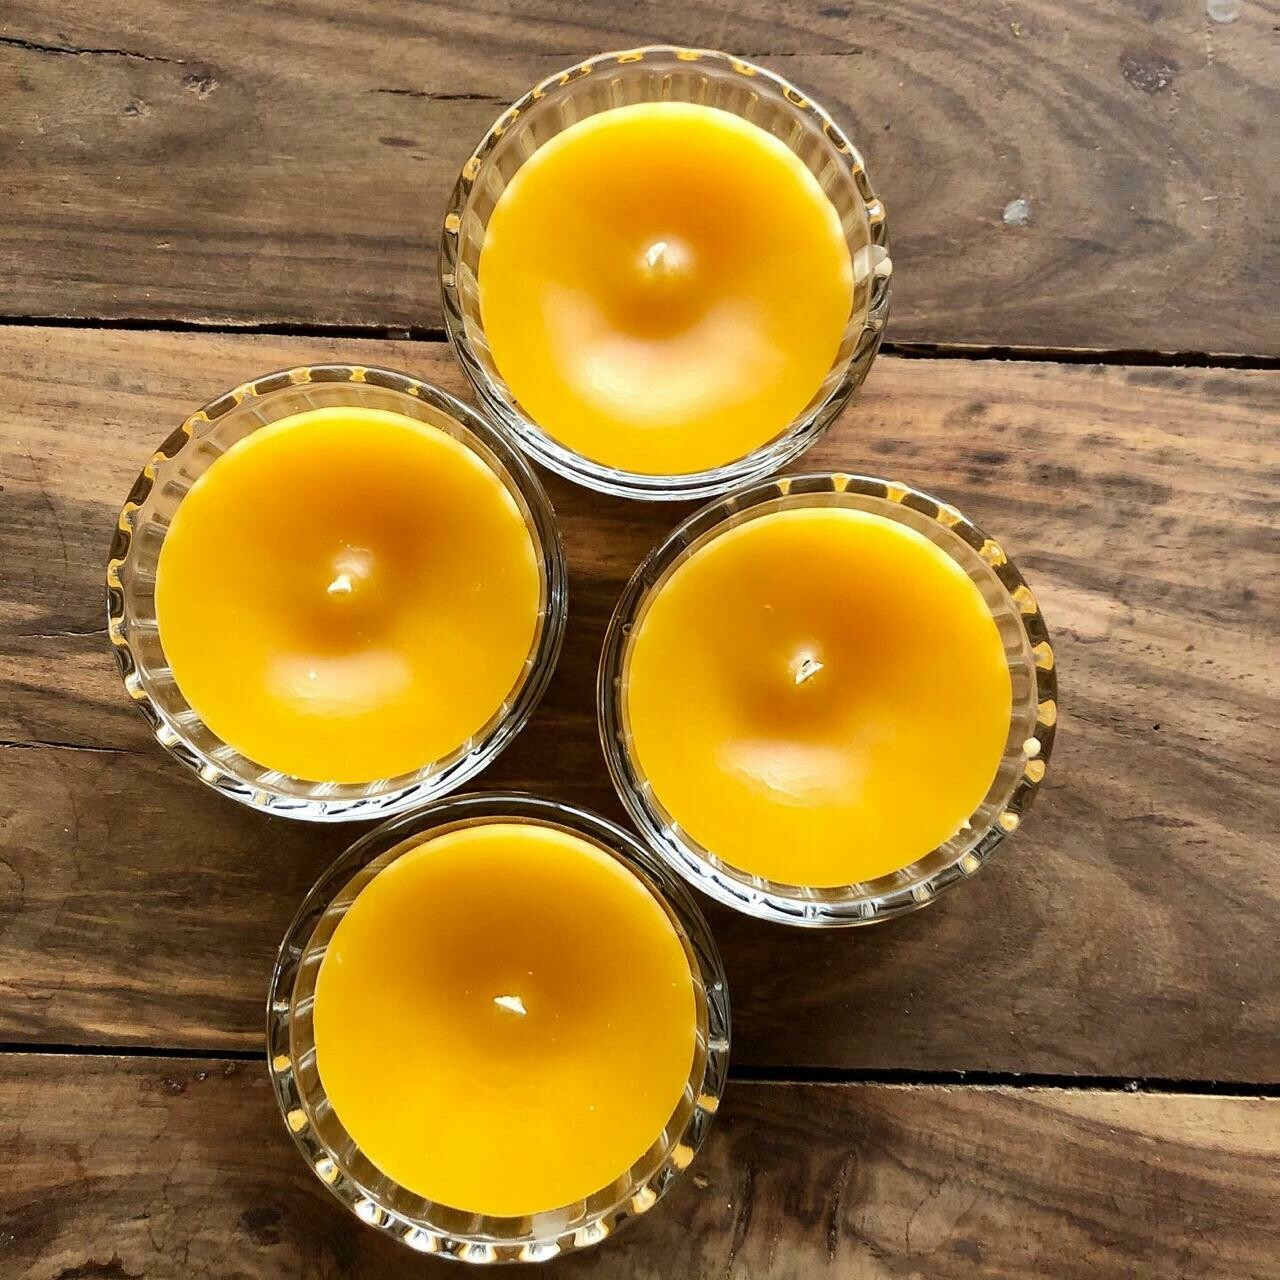 Organic Hand Crafted 100% Pure Beeswax Candle with Lavender Essential Oil - Small